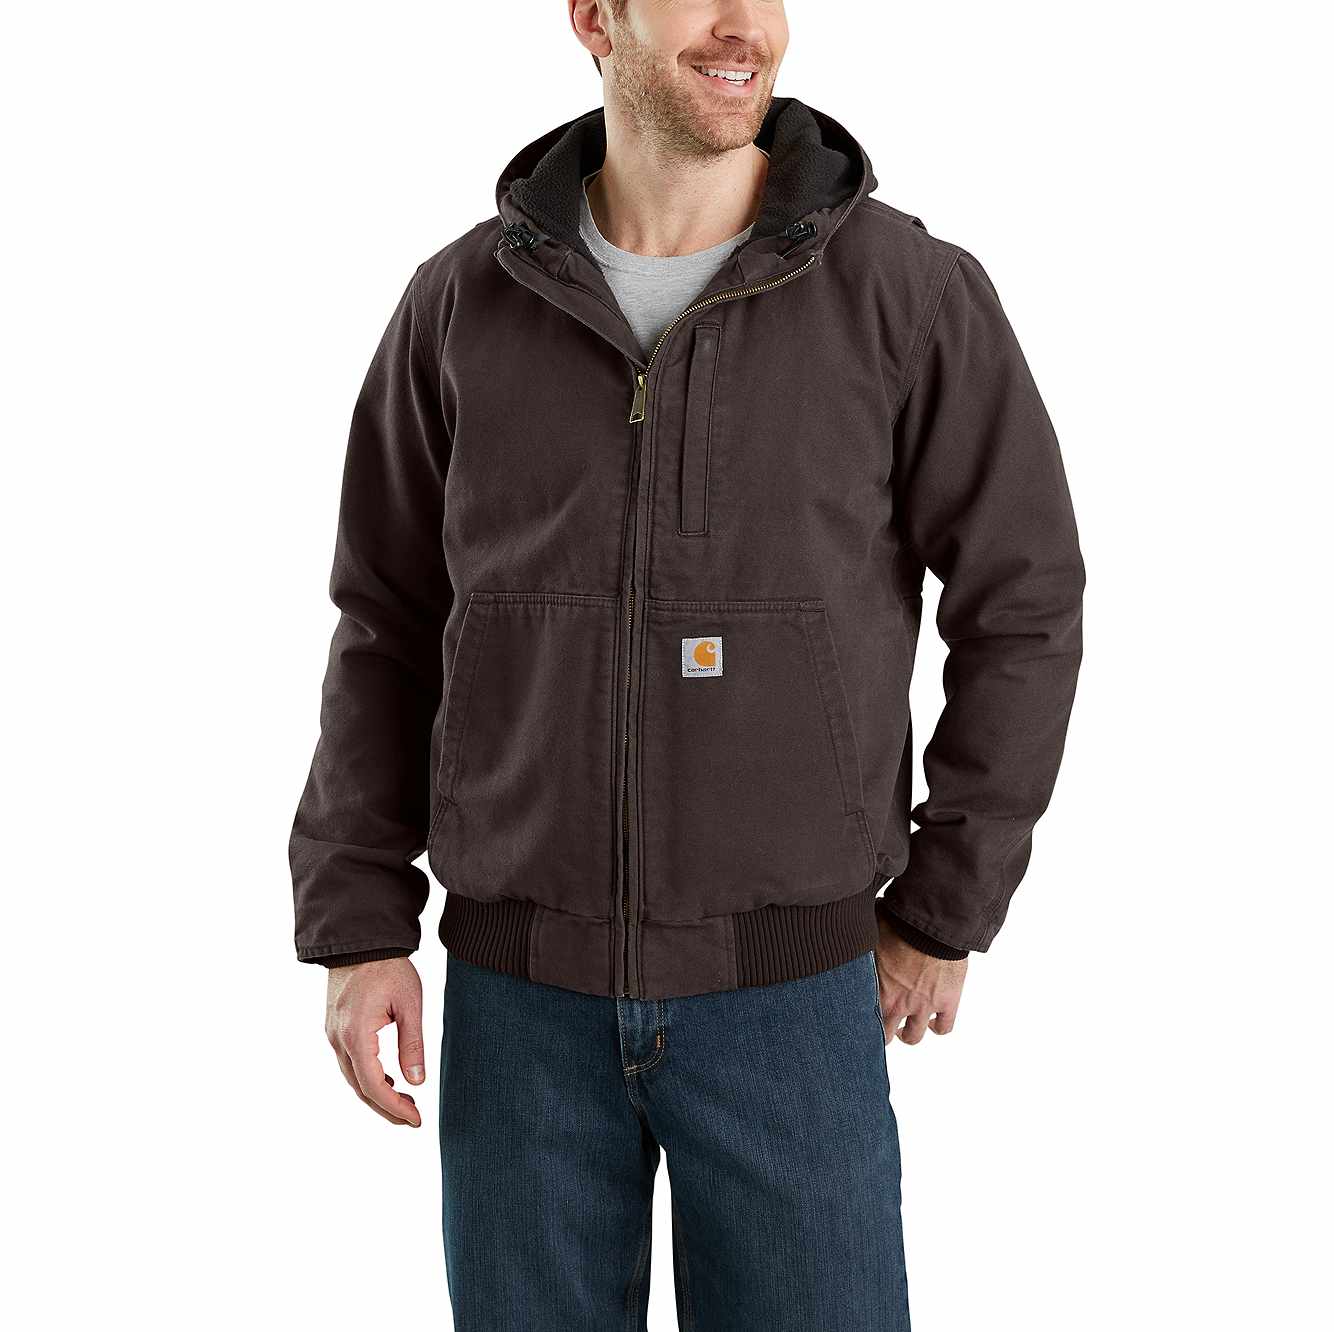 Carhartt Mens Full Swing Armstrong Active Jac Regular and Big /& Tall Sizes